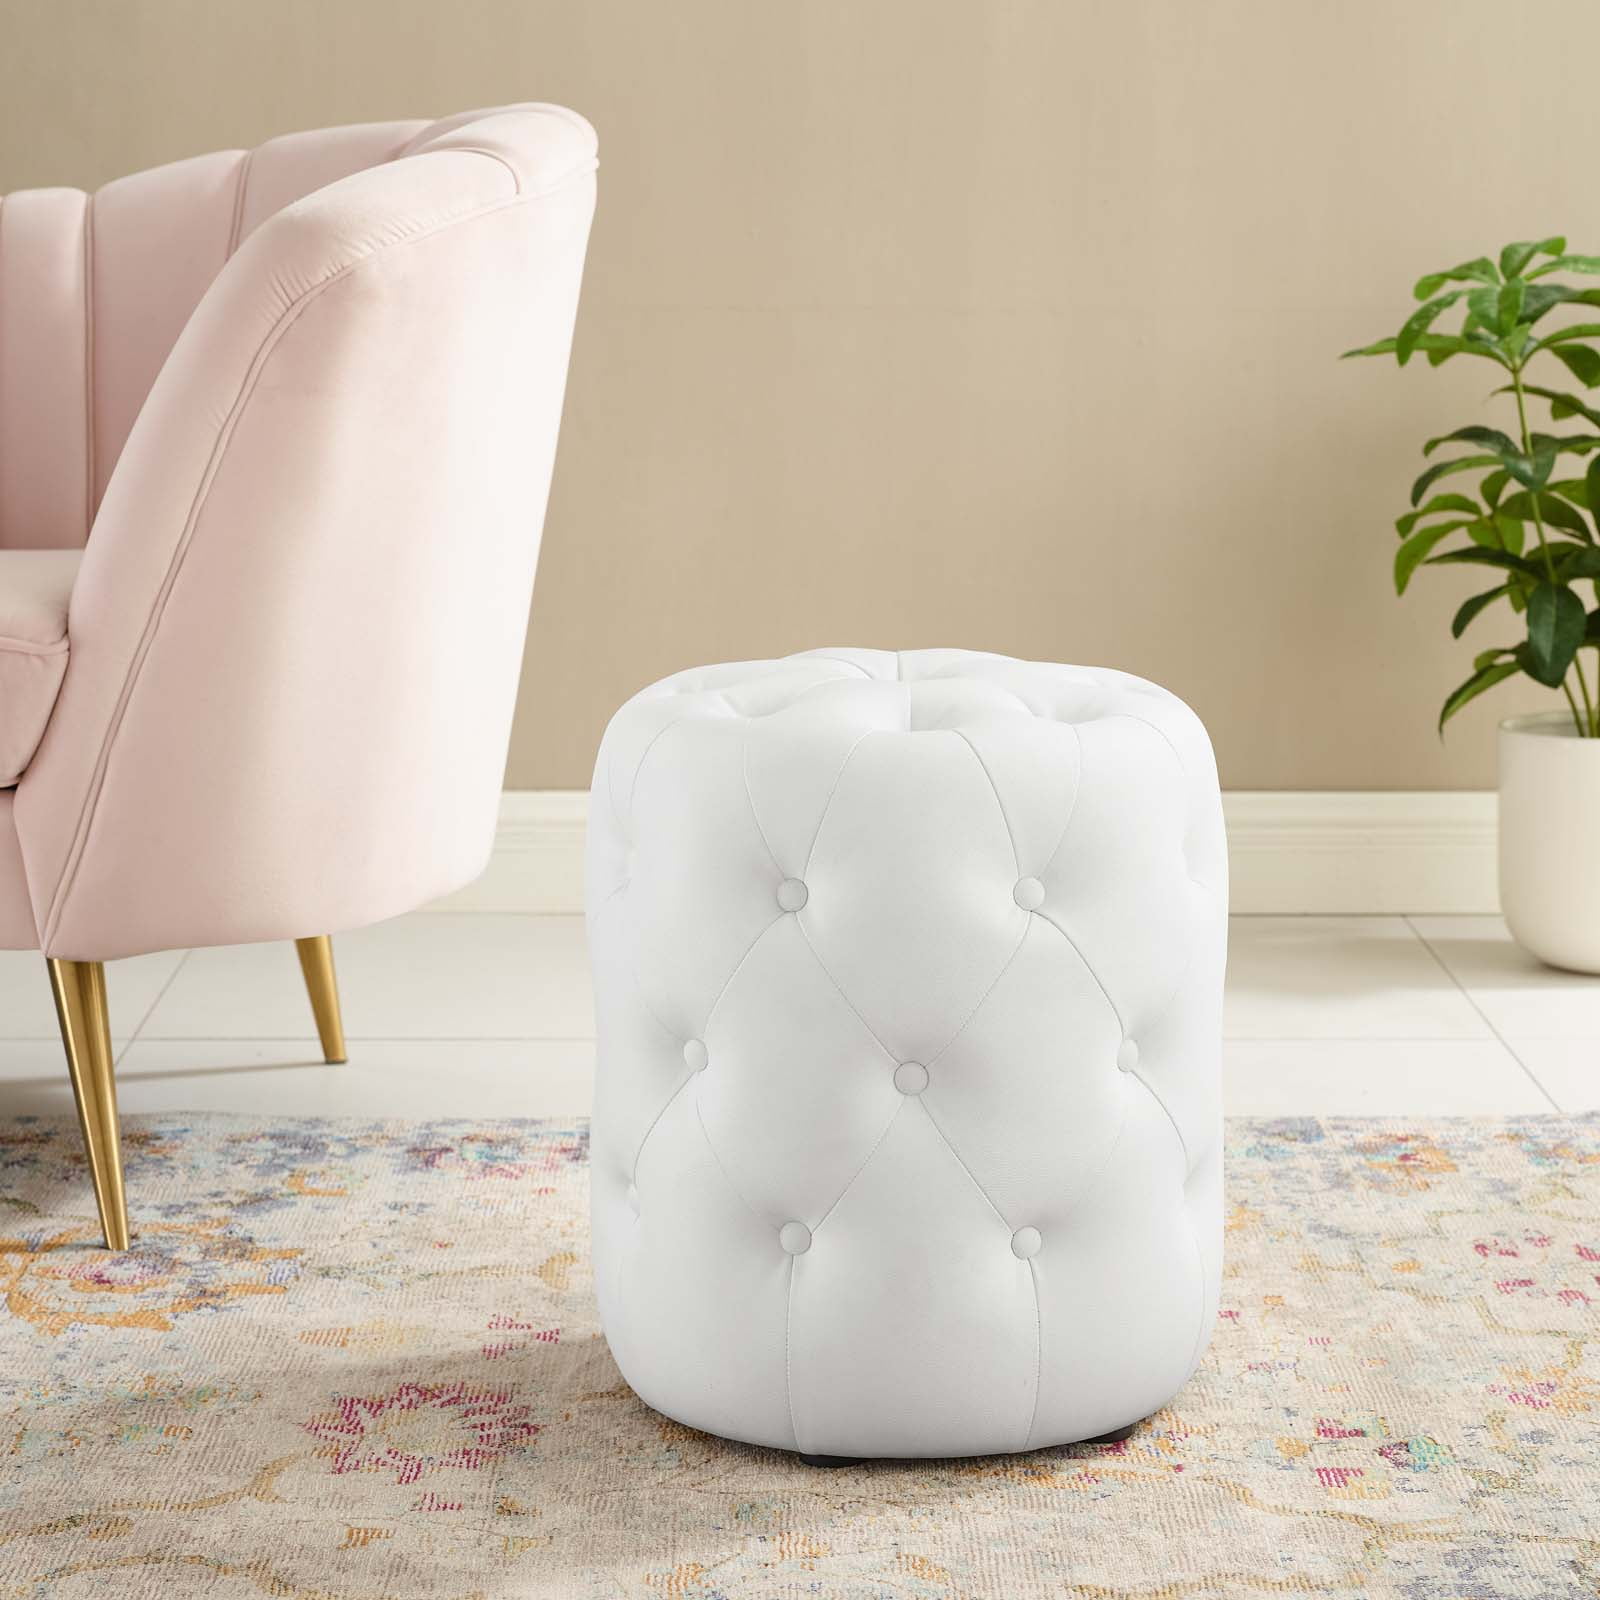 Anthem Tufted On Round Faux Leather, Round Leather Ottoman Chair